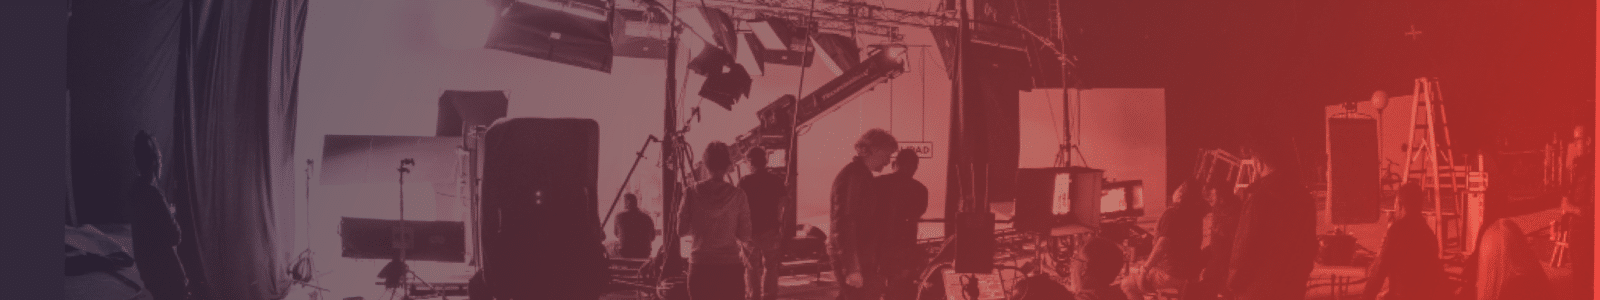 Image of film production crew of about ten people at work with gradient purple to red color overlay